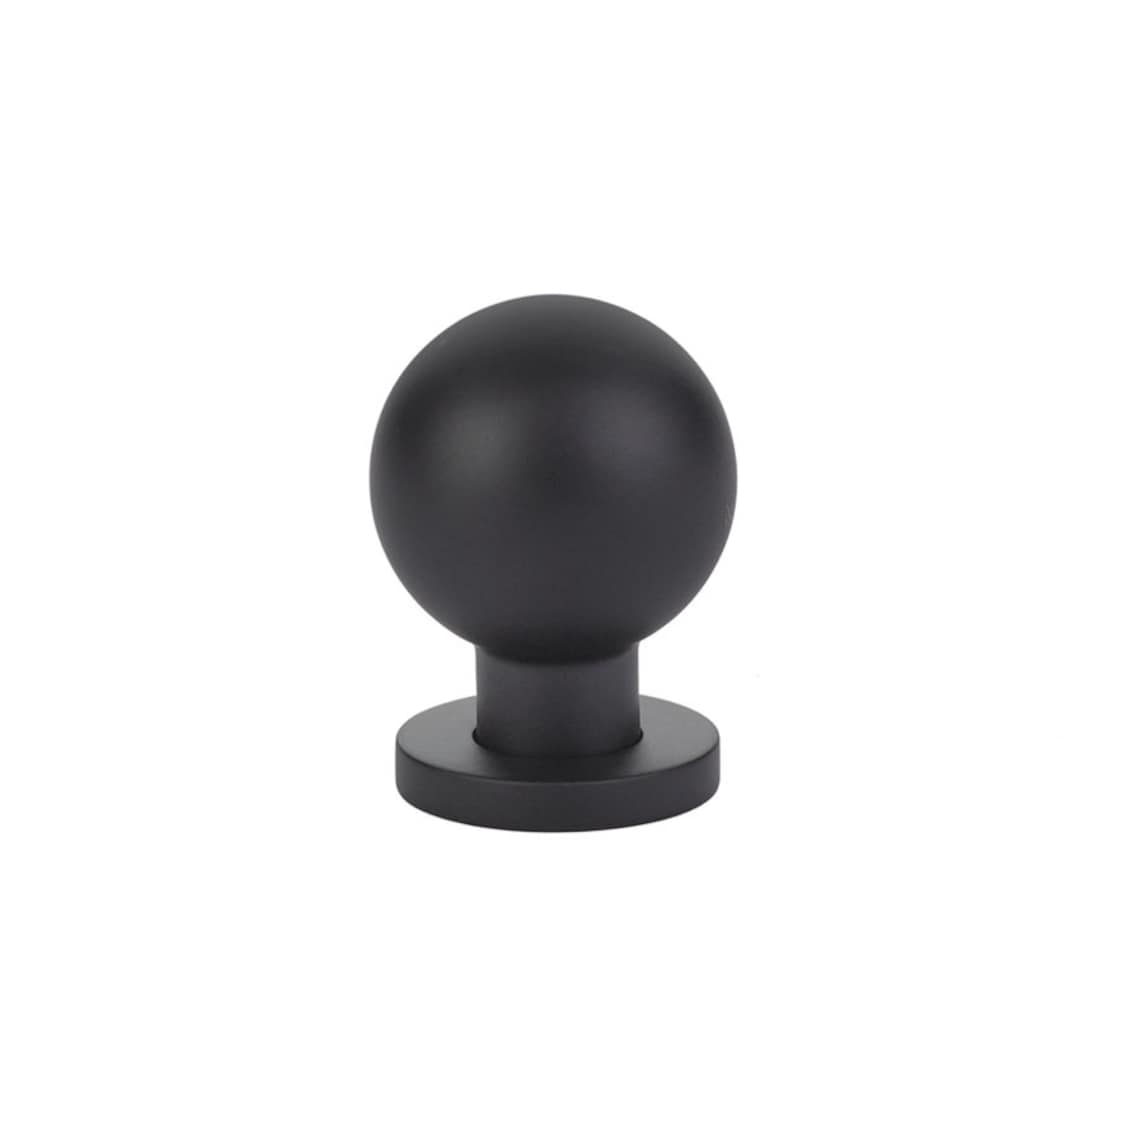 Omni Cabinet Knobs and Drawer Pulls in Matte Black